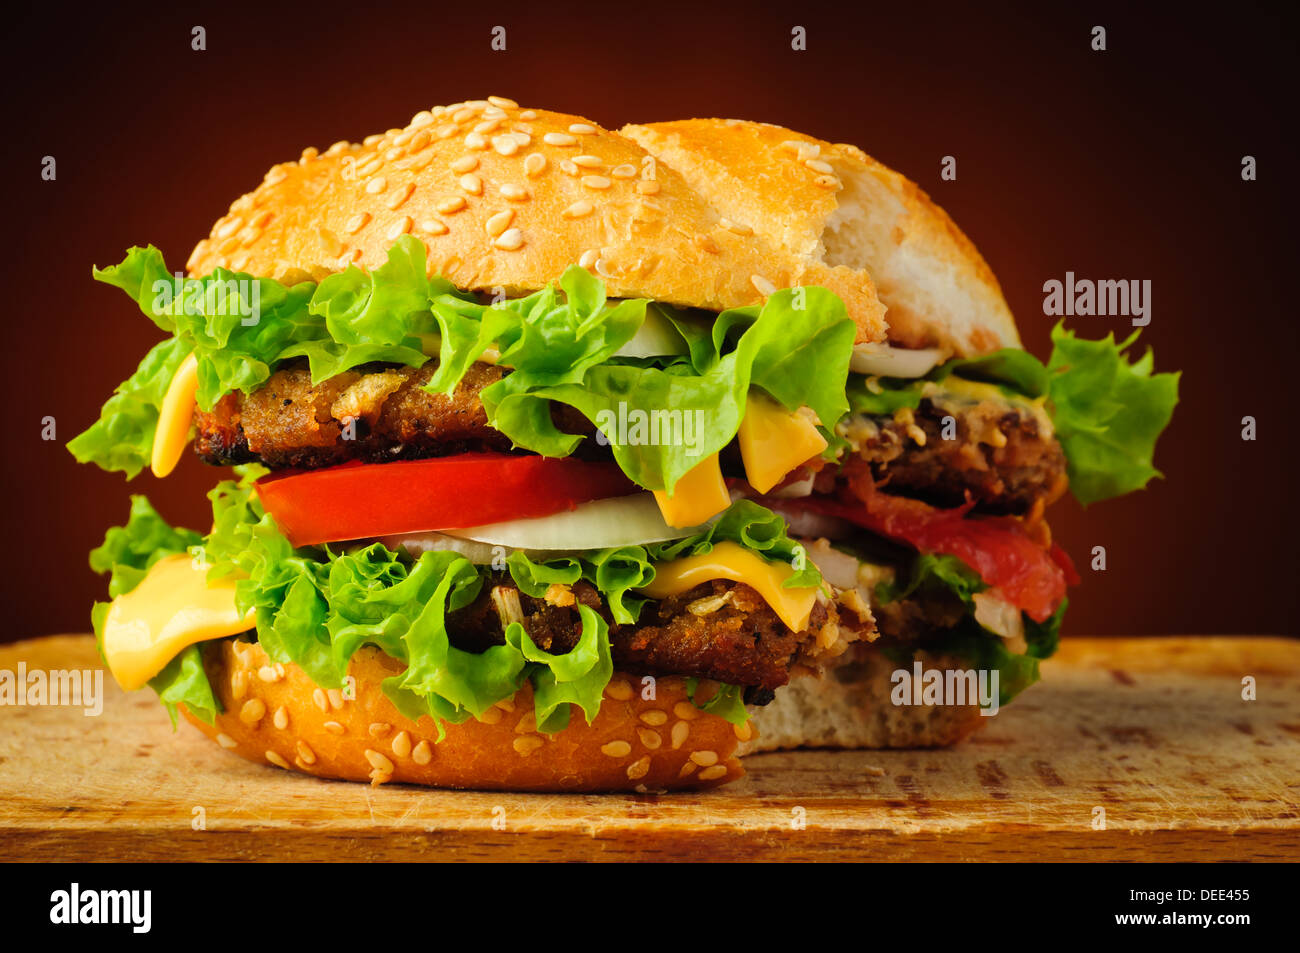 fast food with big delicious bitten hamburger or cheeseburger Stock Photo